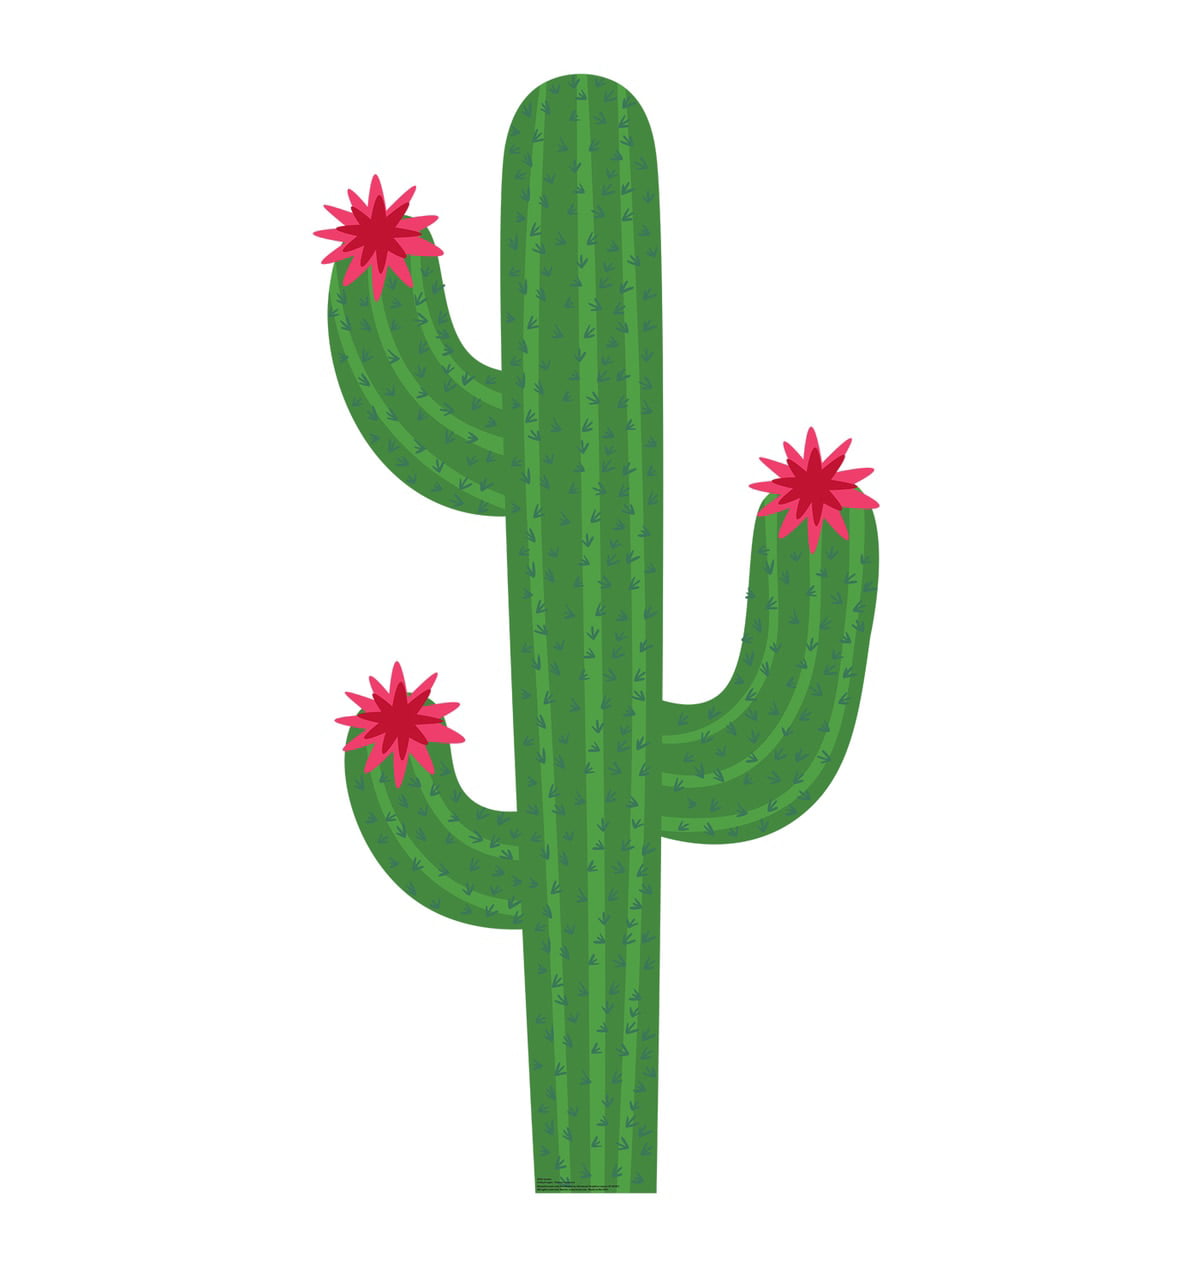 Picture of Advanced Graphics 3025 71 x 36 in. Cactus Cardboard Cutout